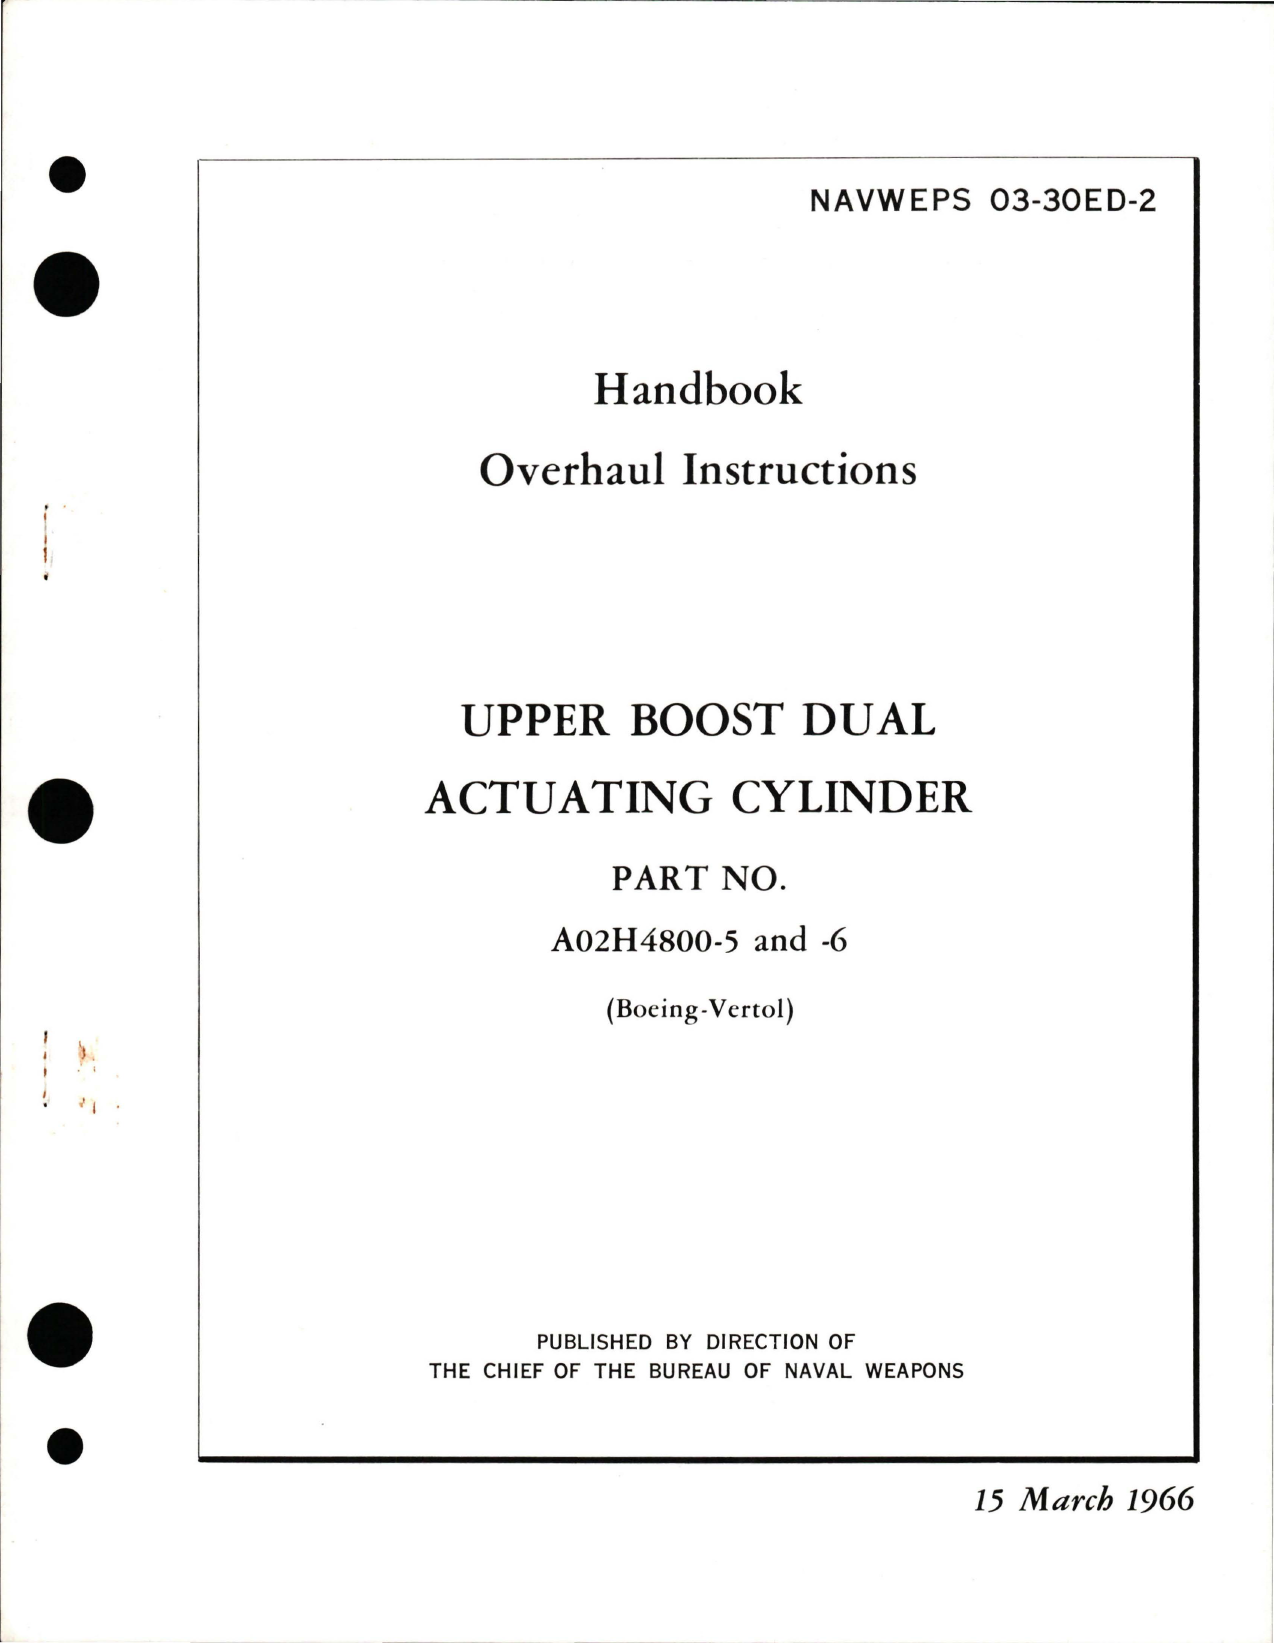 Sample page 1 from AirCorps Library document: Overhaul Instructions for Upper Boost Dual Actuating Cylinder - Part A02H4800-5 and A02H4800-6